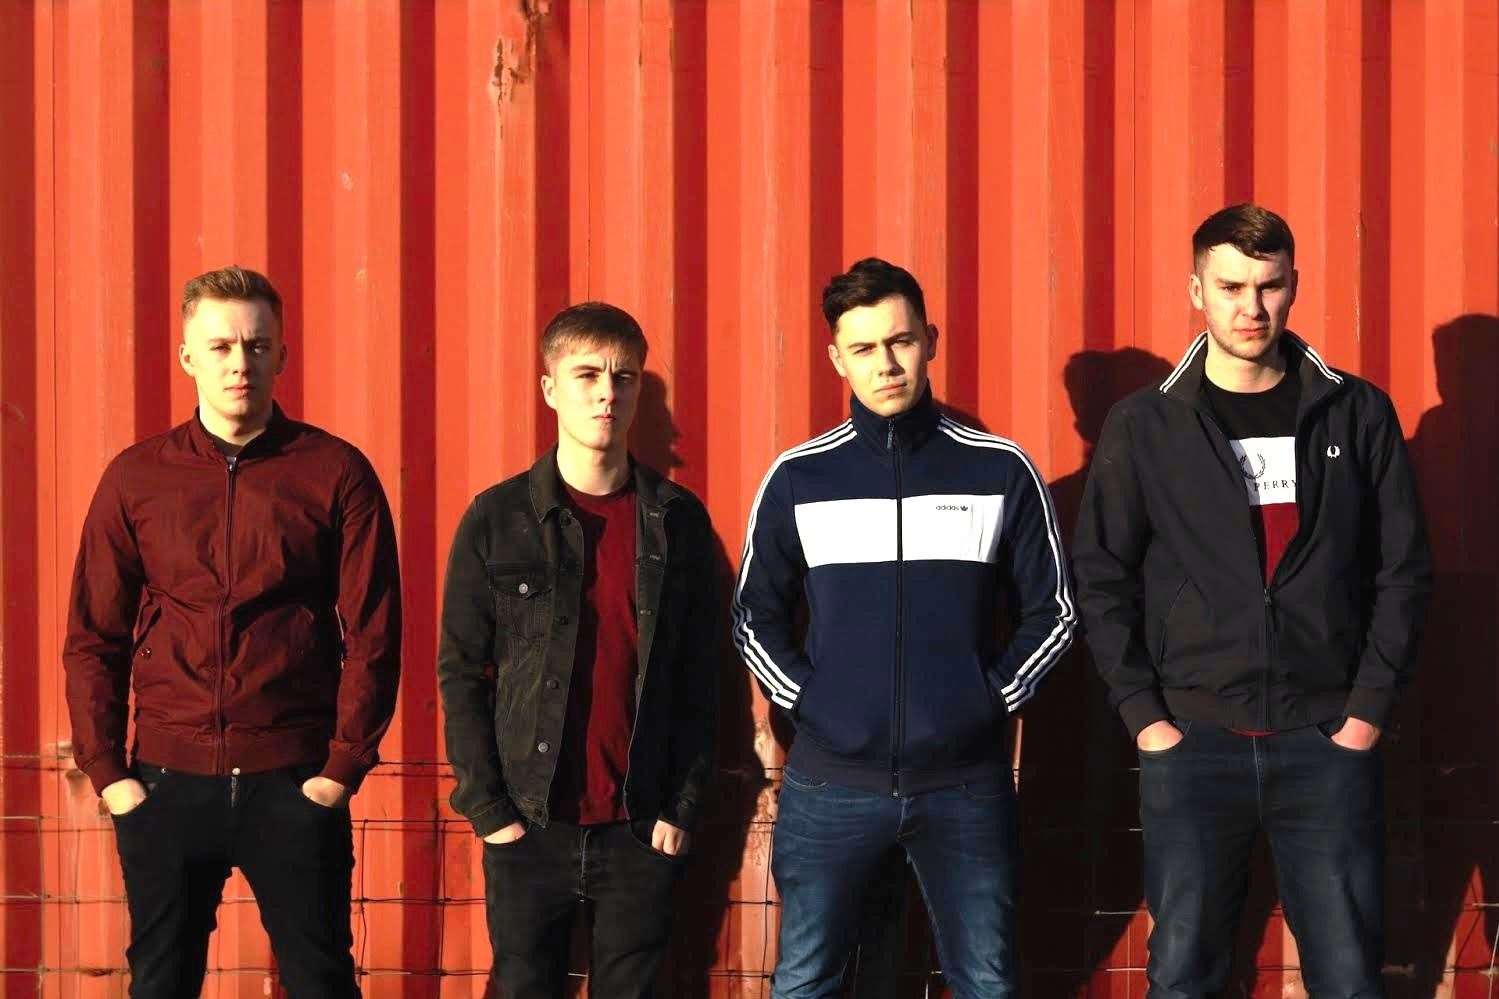 OpenPlan are (from left) drummer Jonathan Mackay, lead guitarist Declan Gunn, lead vocals and rhythm guitarist Adam Wares and James Anderson on bass and backing vocals.